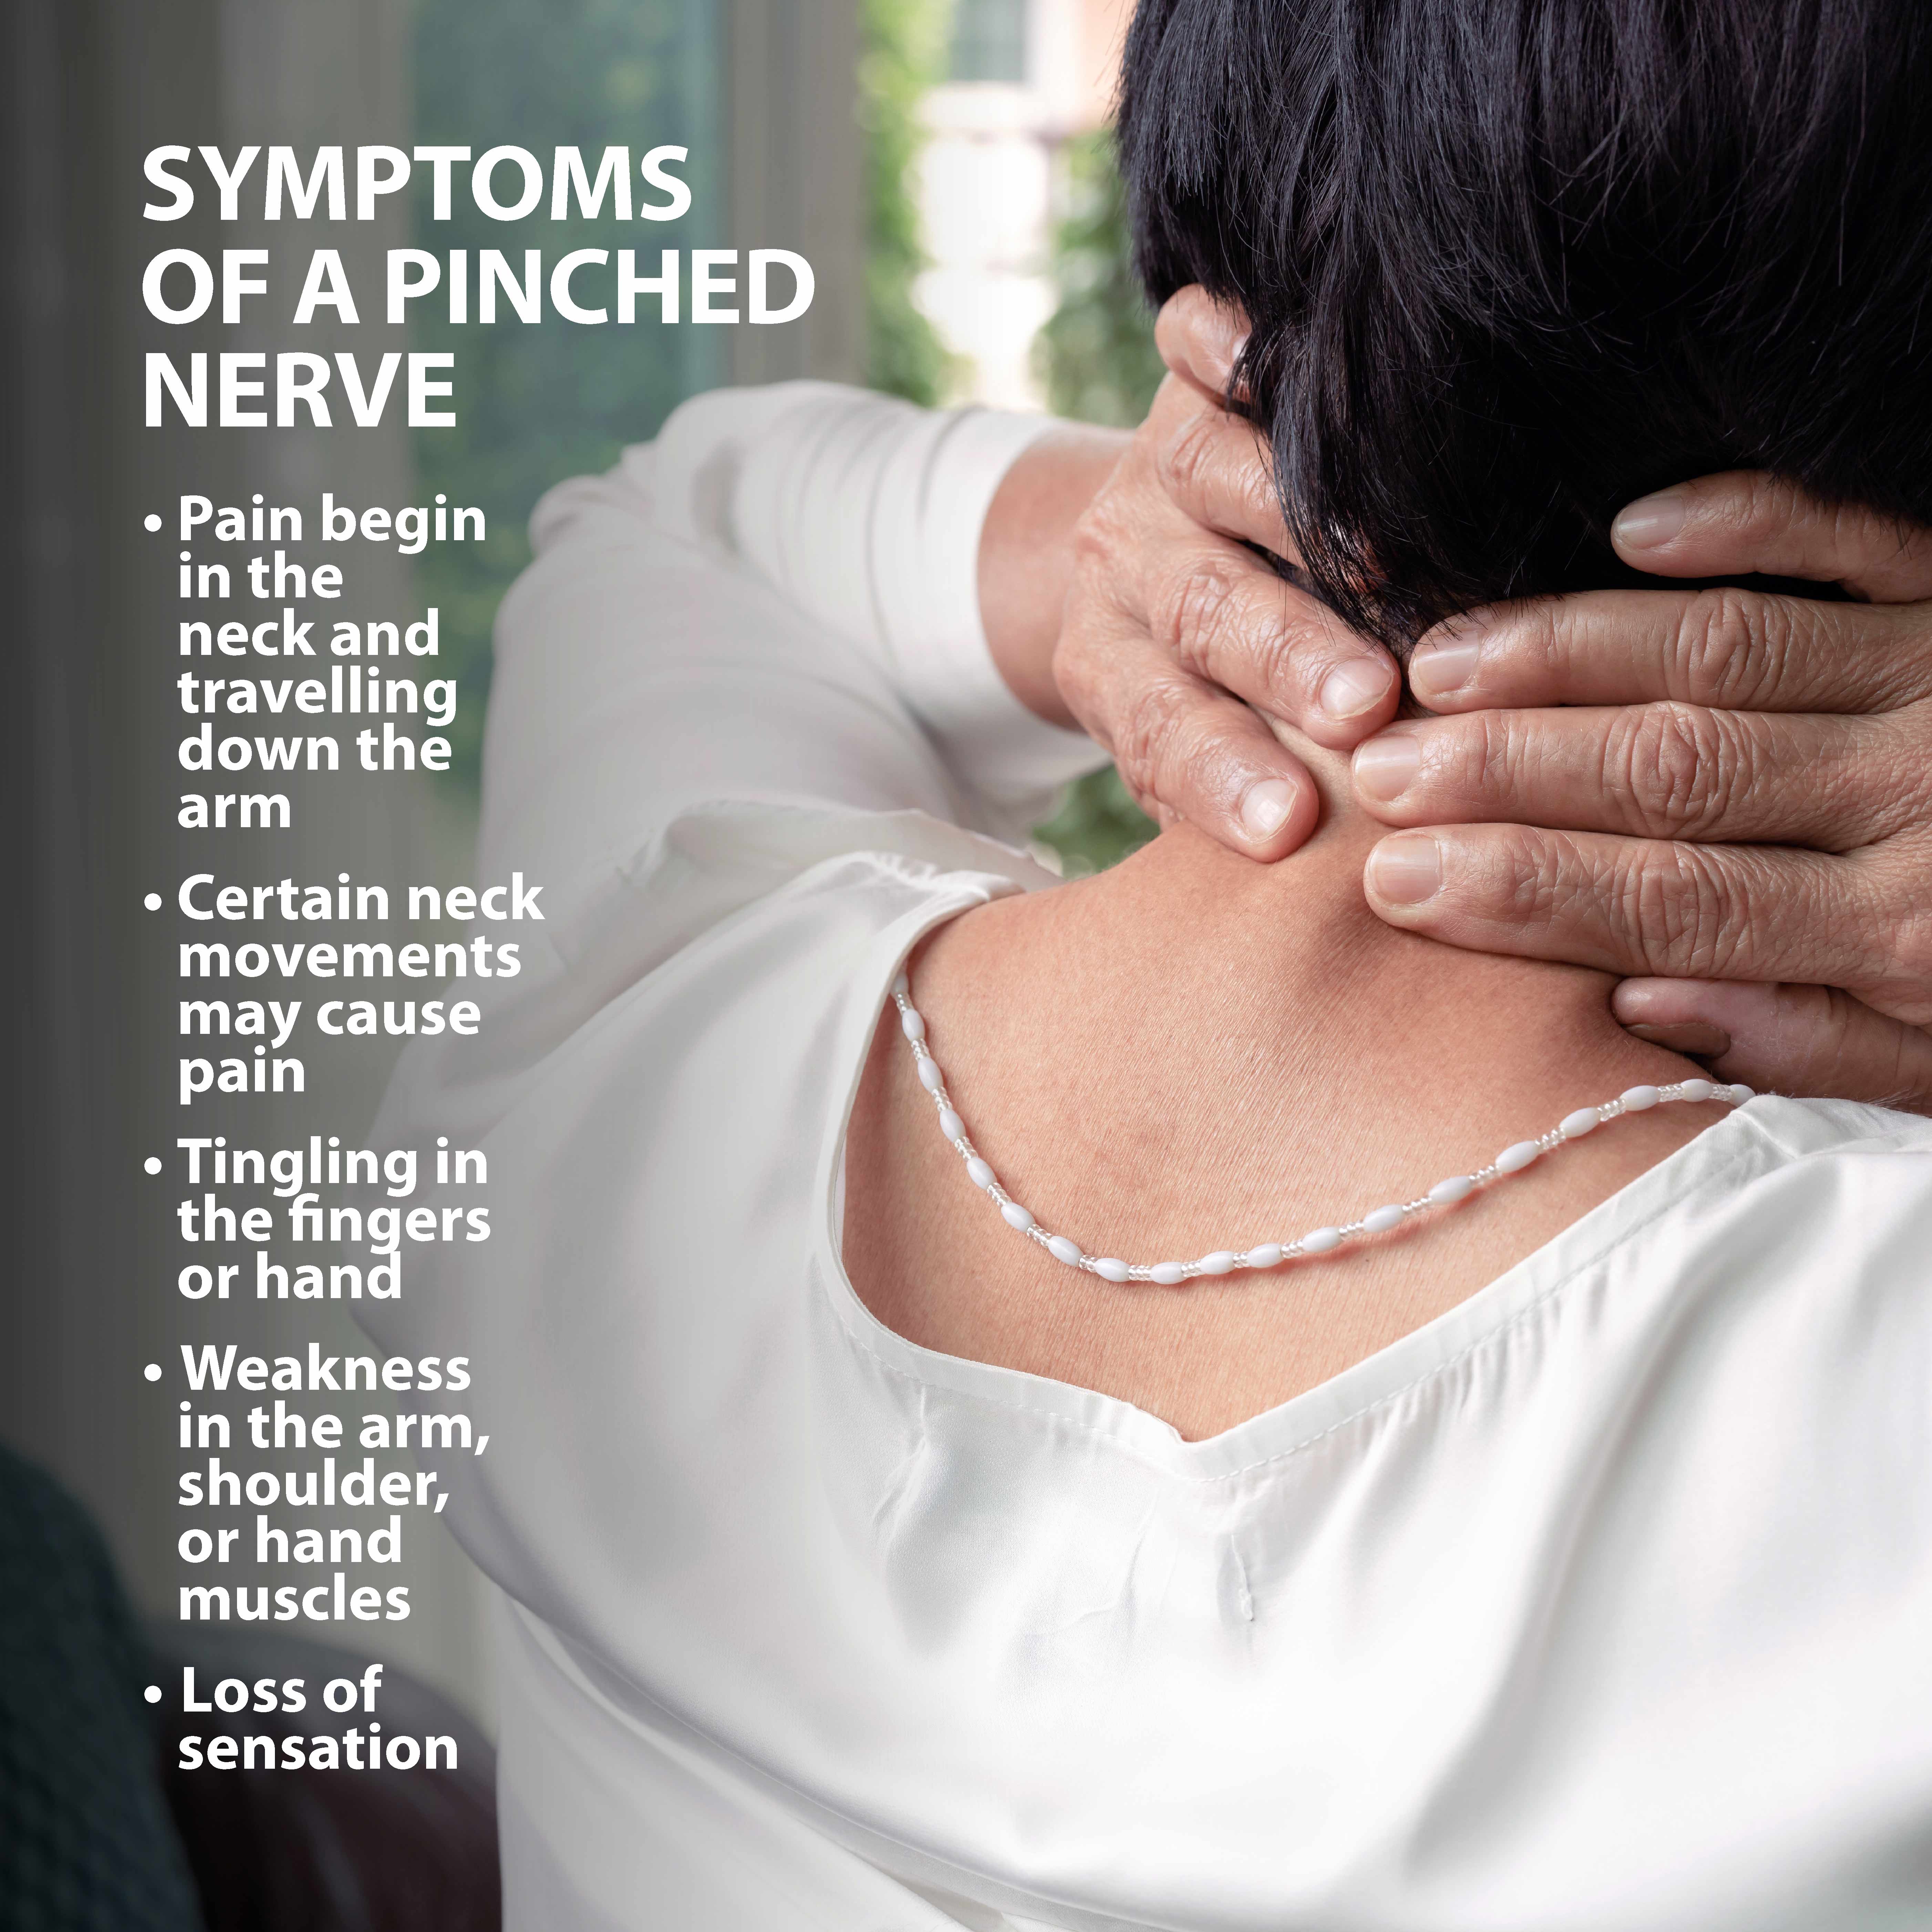 Pinched Nerve Symptoms Graphic